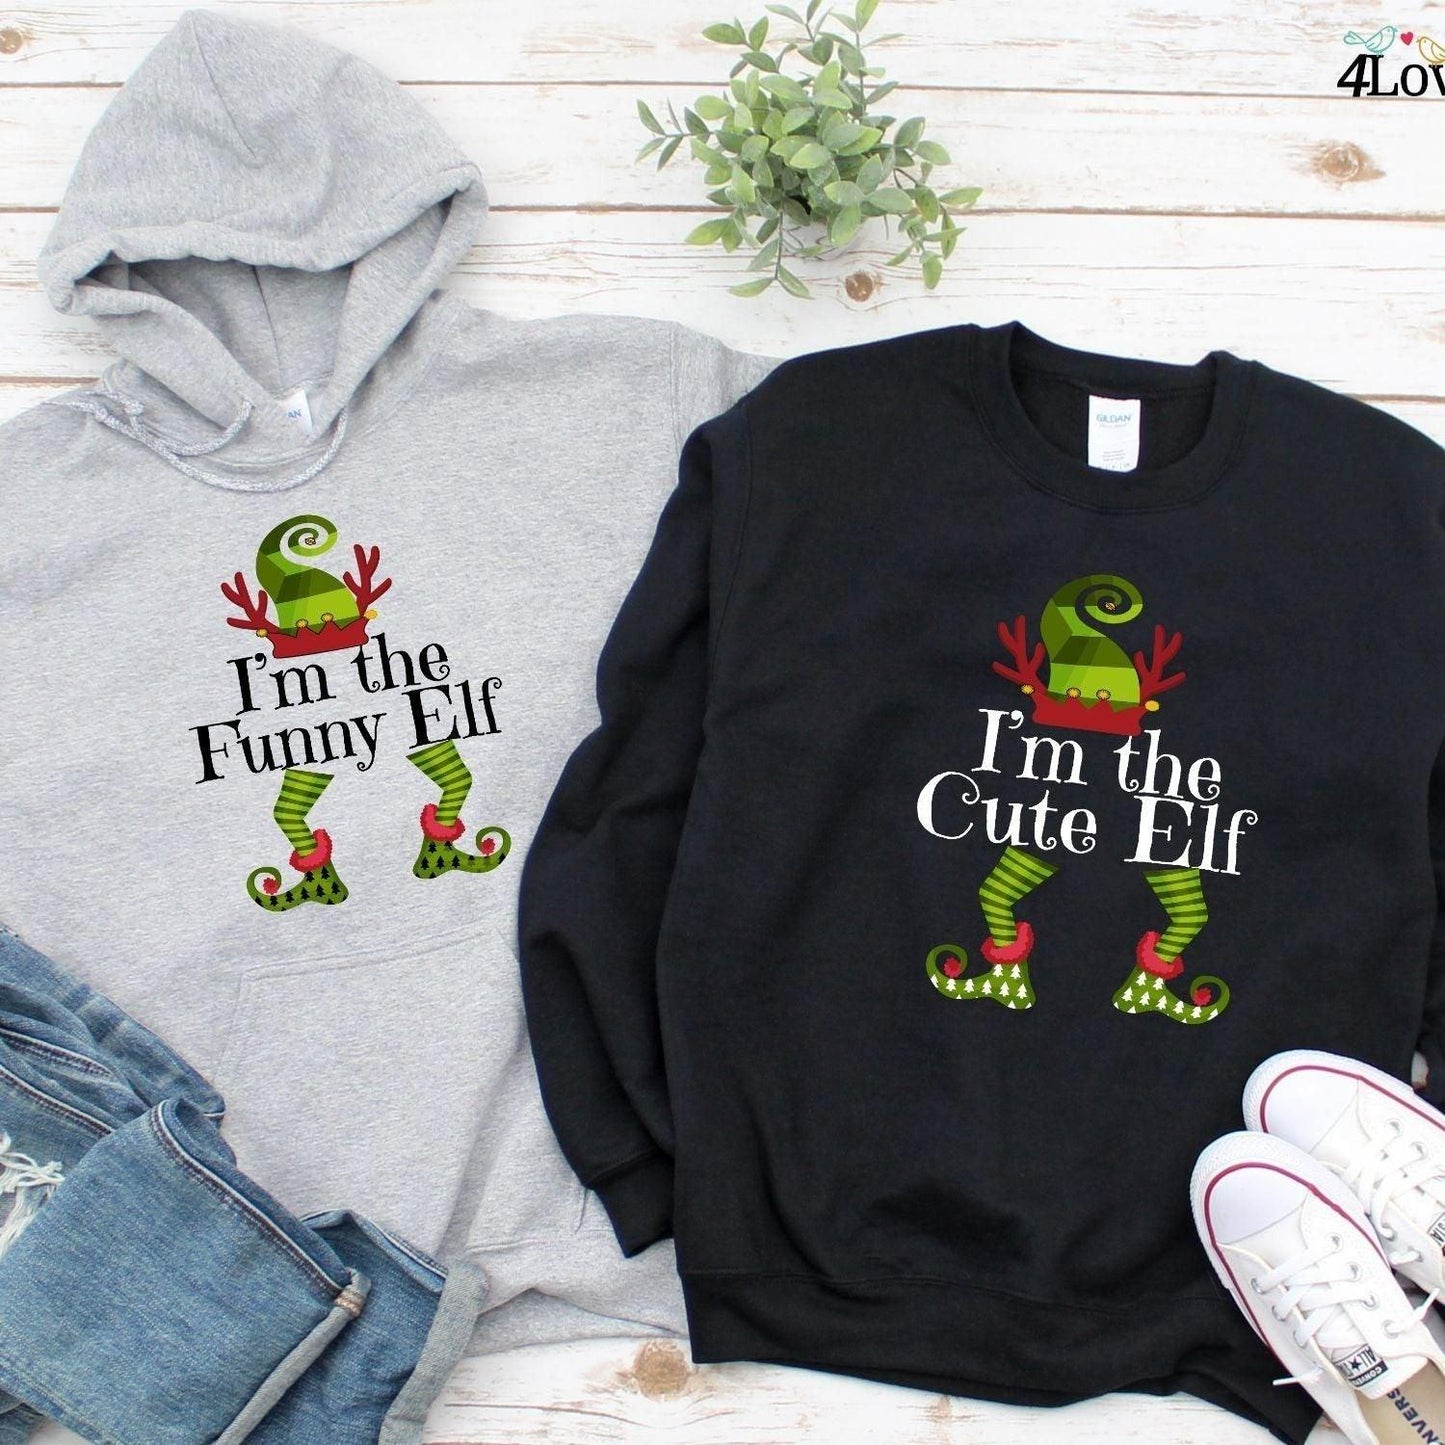 I'm The Cute Elf & I'm The Funny Elf Matching Christmas Outfits - 4Lovebirds